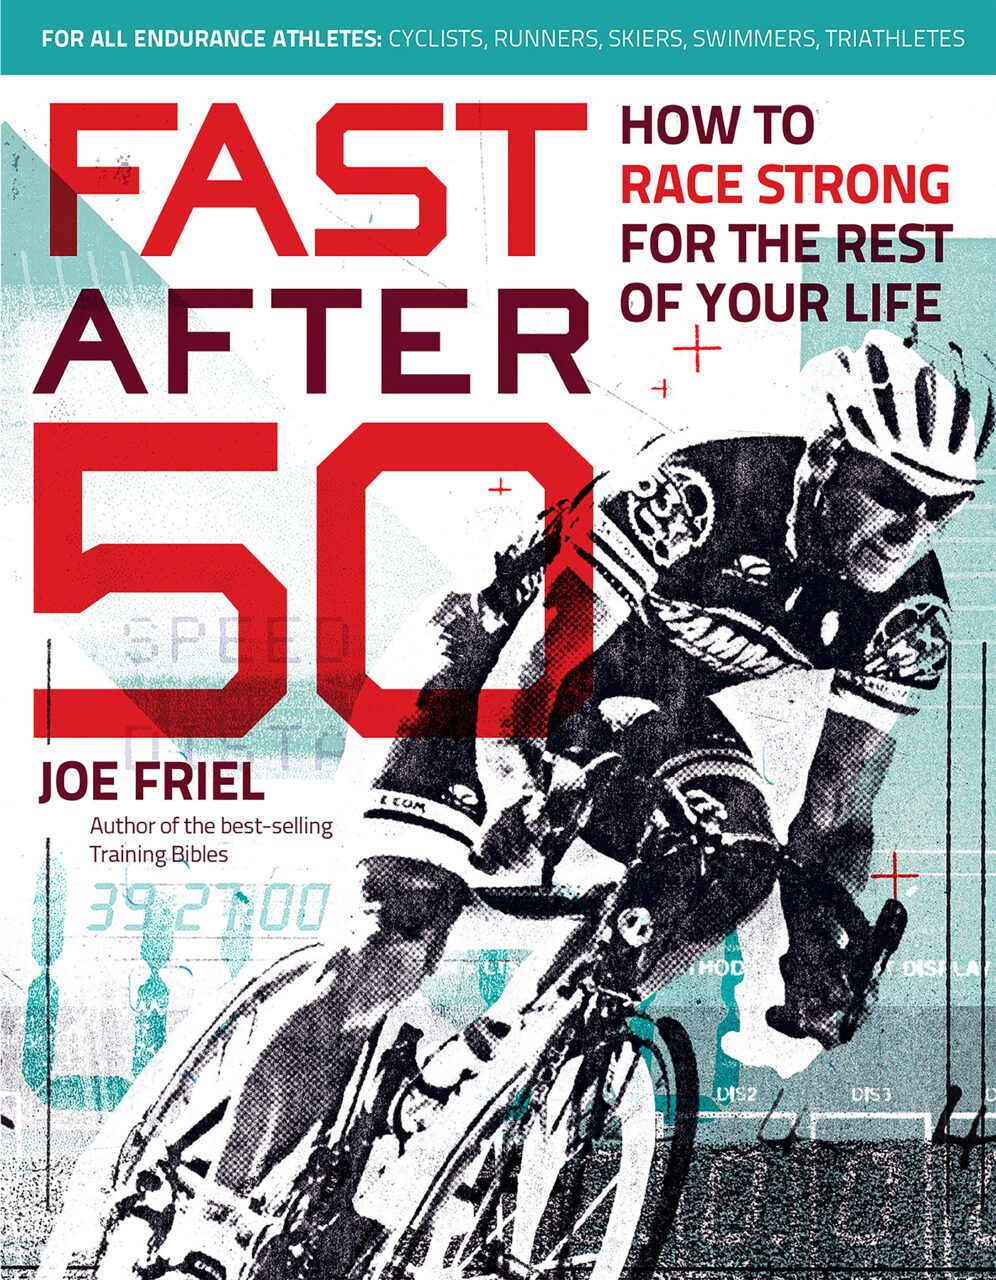 Cover of "Fast After 50" by Joe Friel